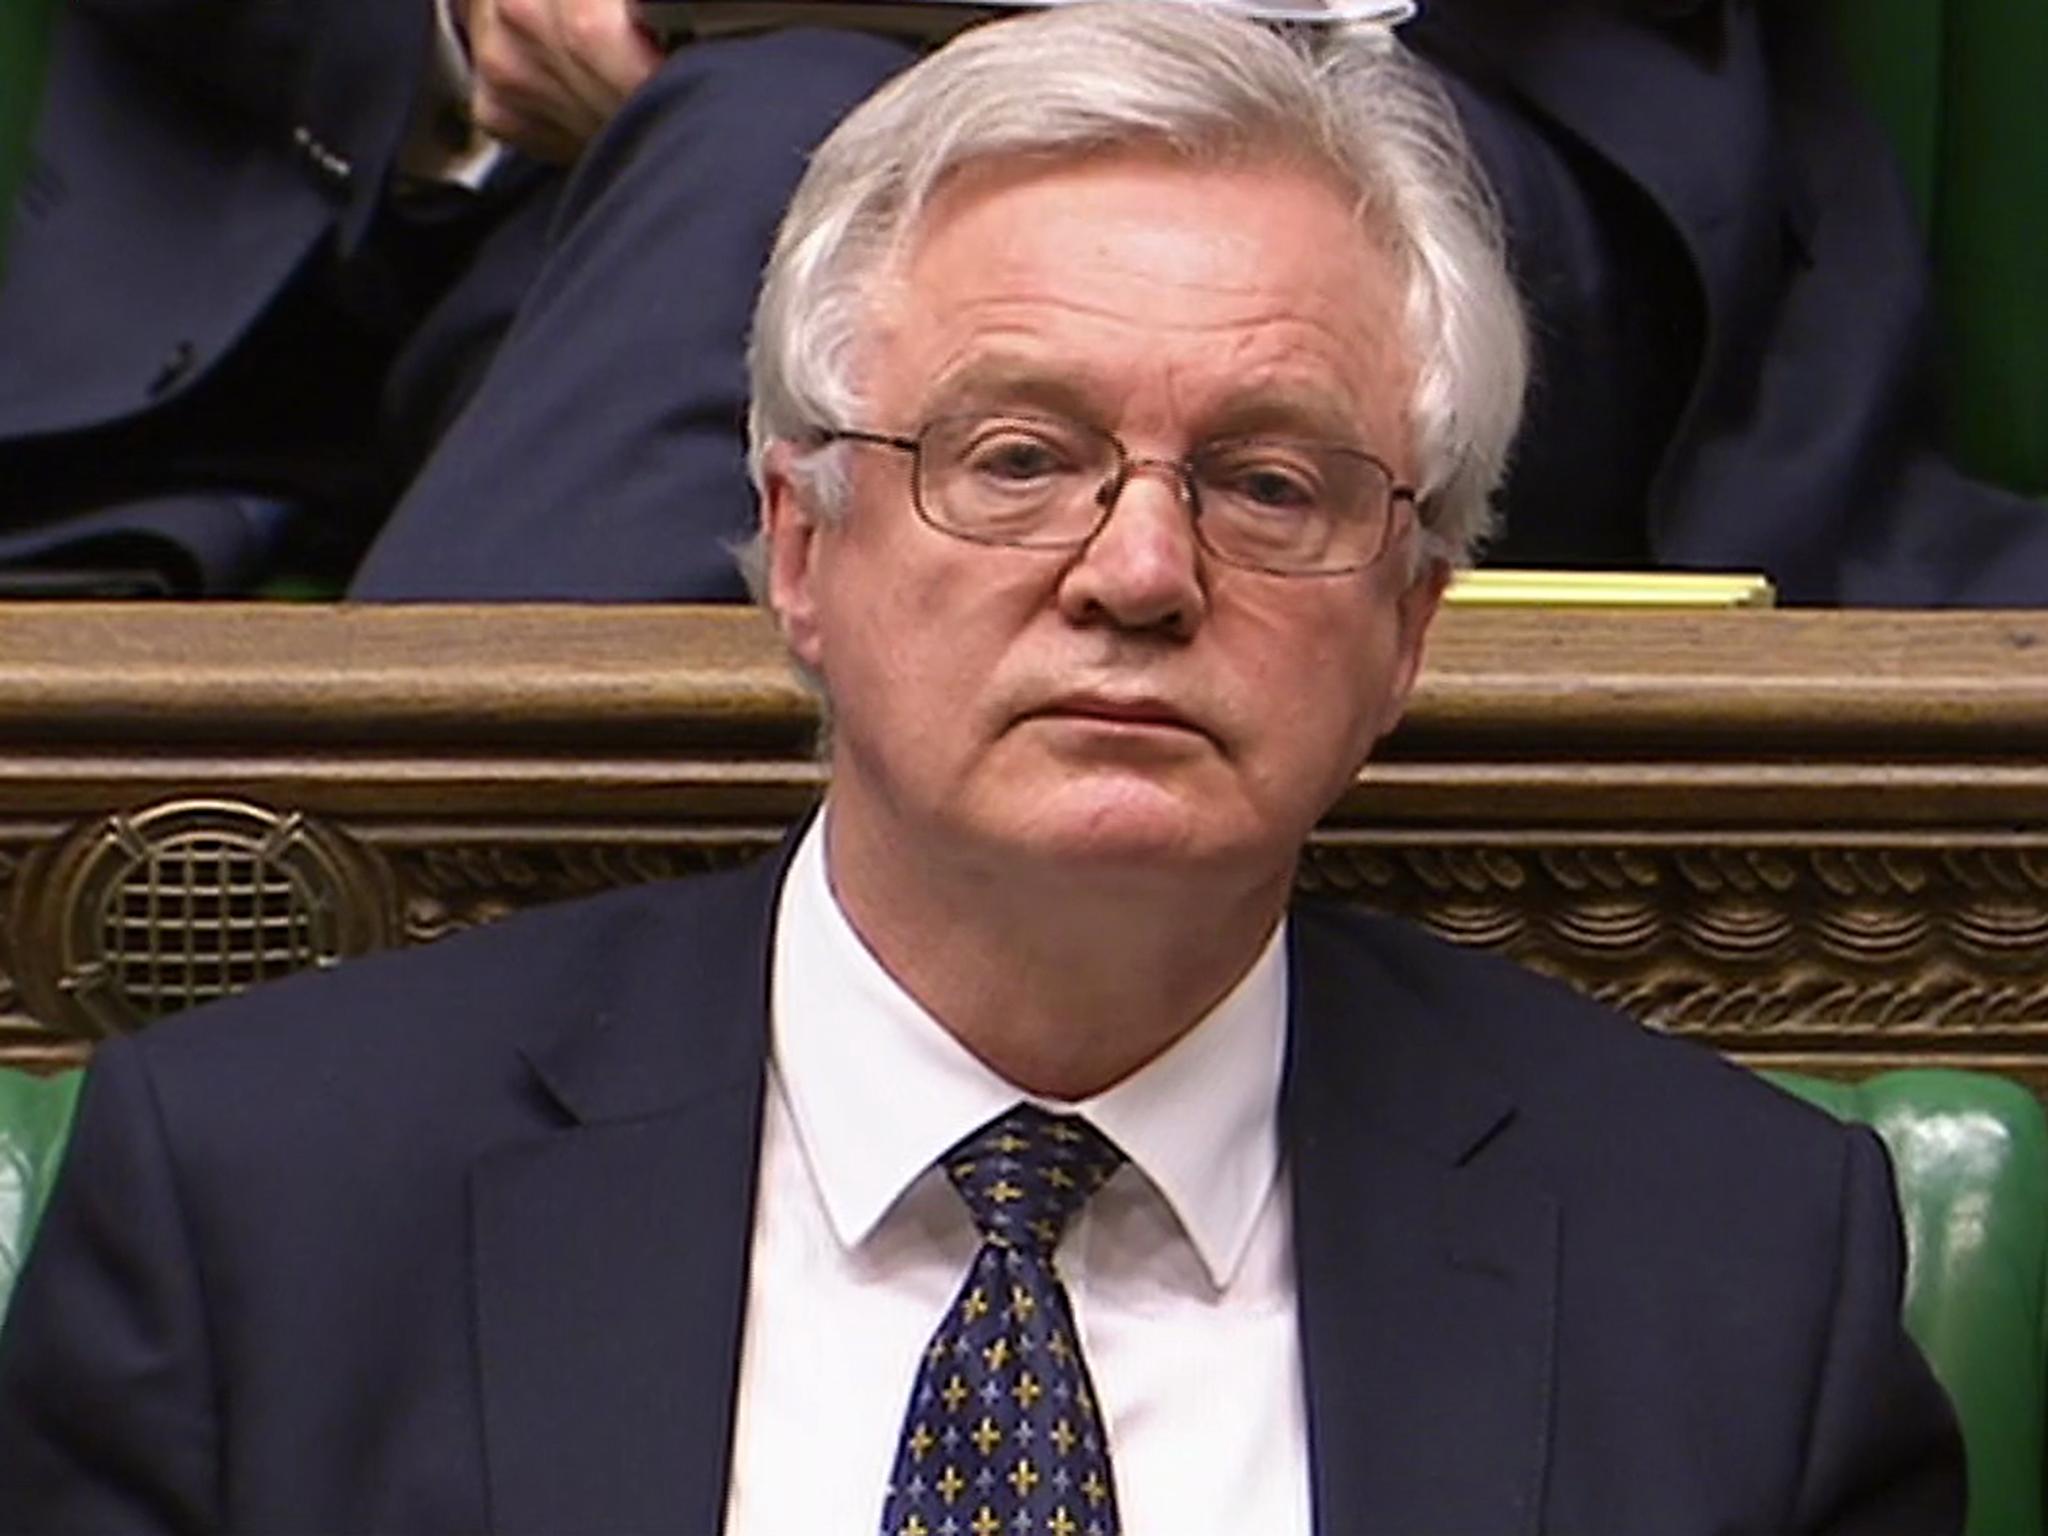 Brexit Secretary David Davis confirmed thousands of laws would be replaced via statutory instrument